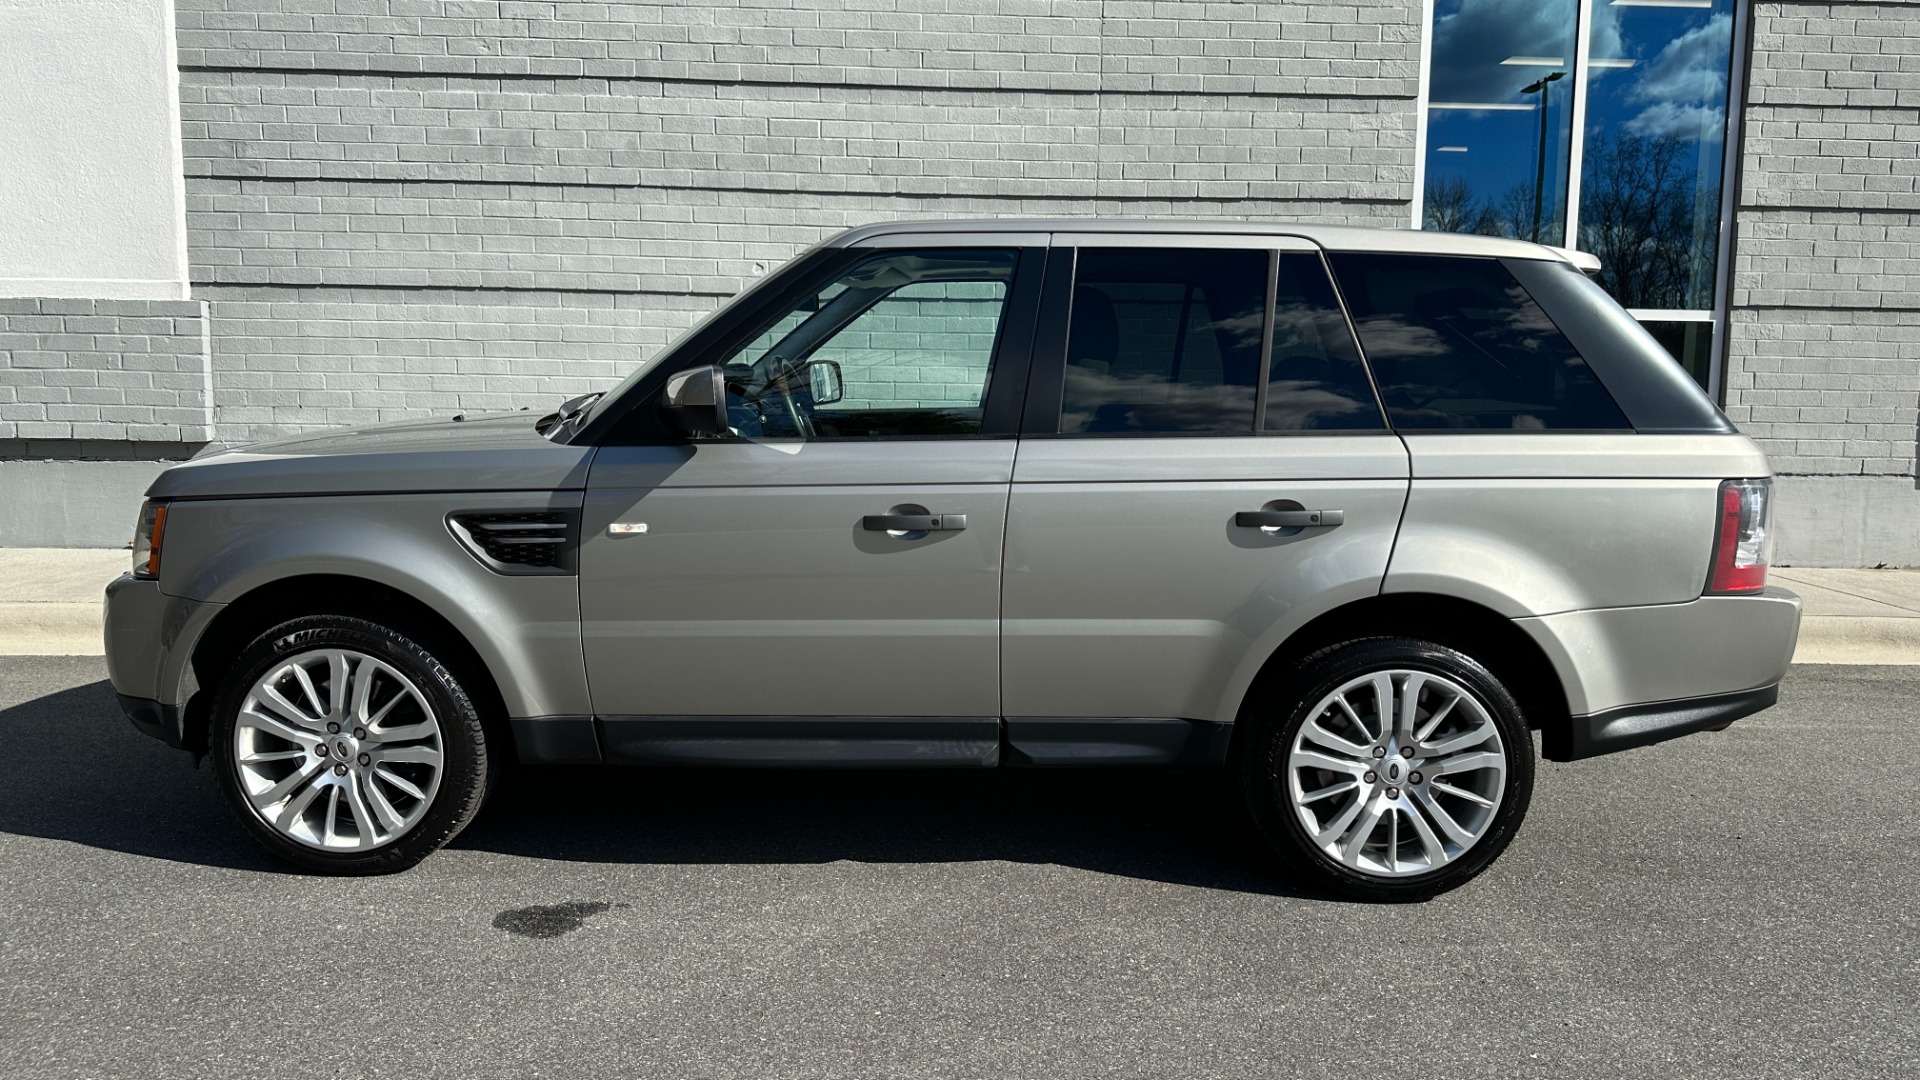 Used 2010 Land Rover Range Rover Sport HSE LUX / EXTENDED LEATHER / LUXURY INTERIOR PKG / REAR ENTERTAINMENT for sale $14,995 at Formula Imports in Charlotte NC 28227 3